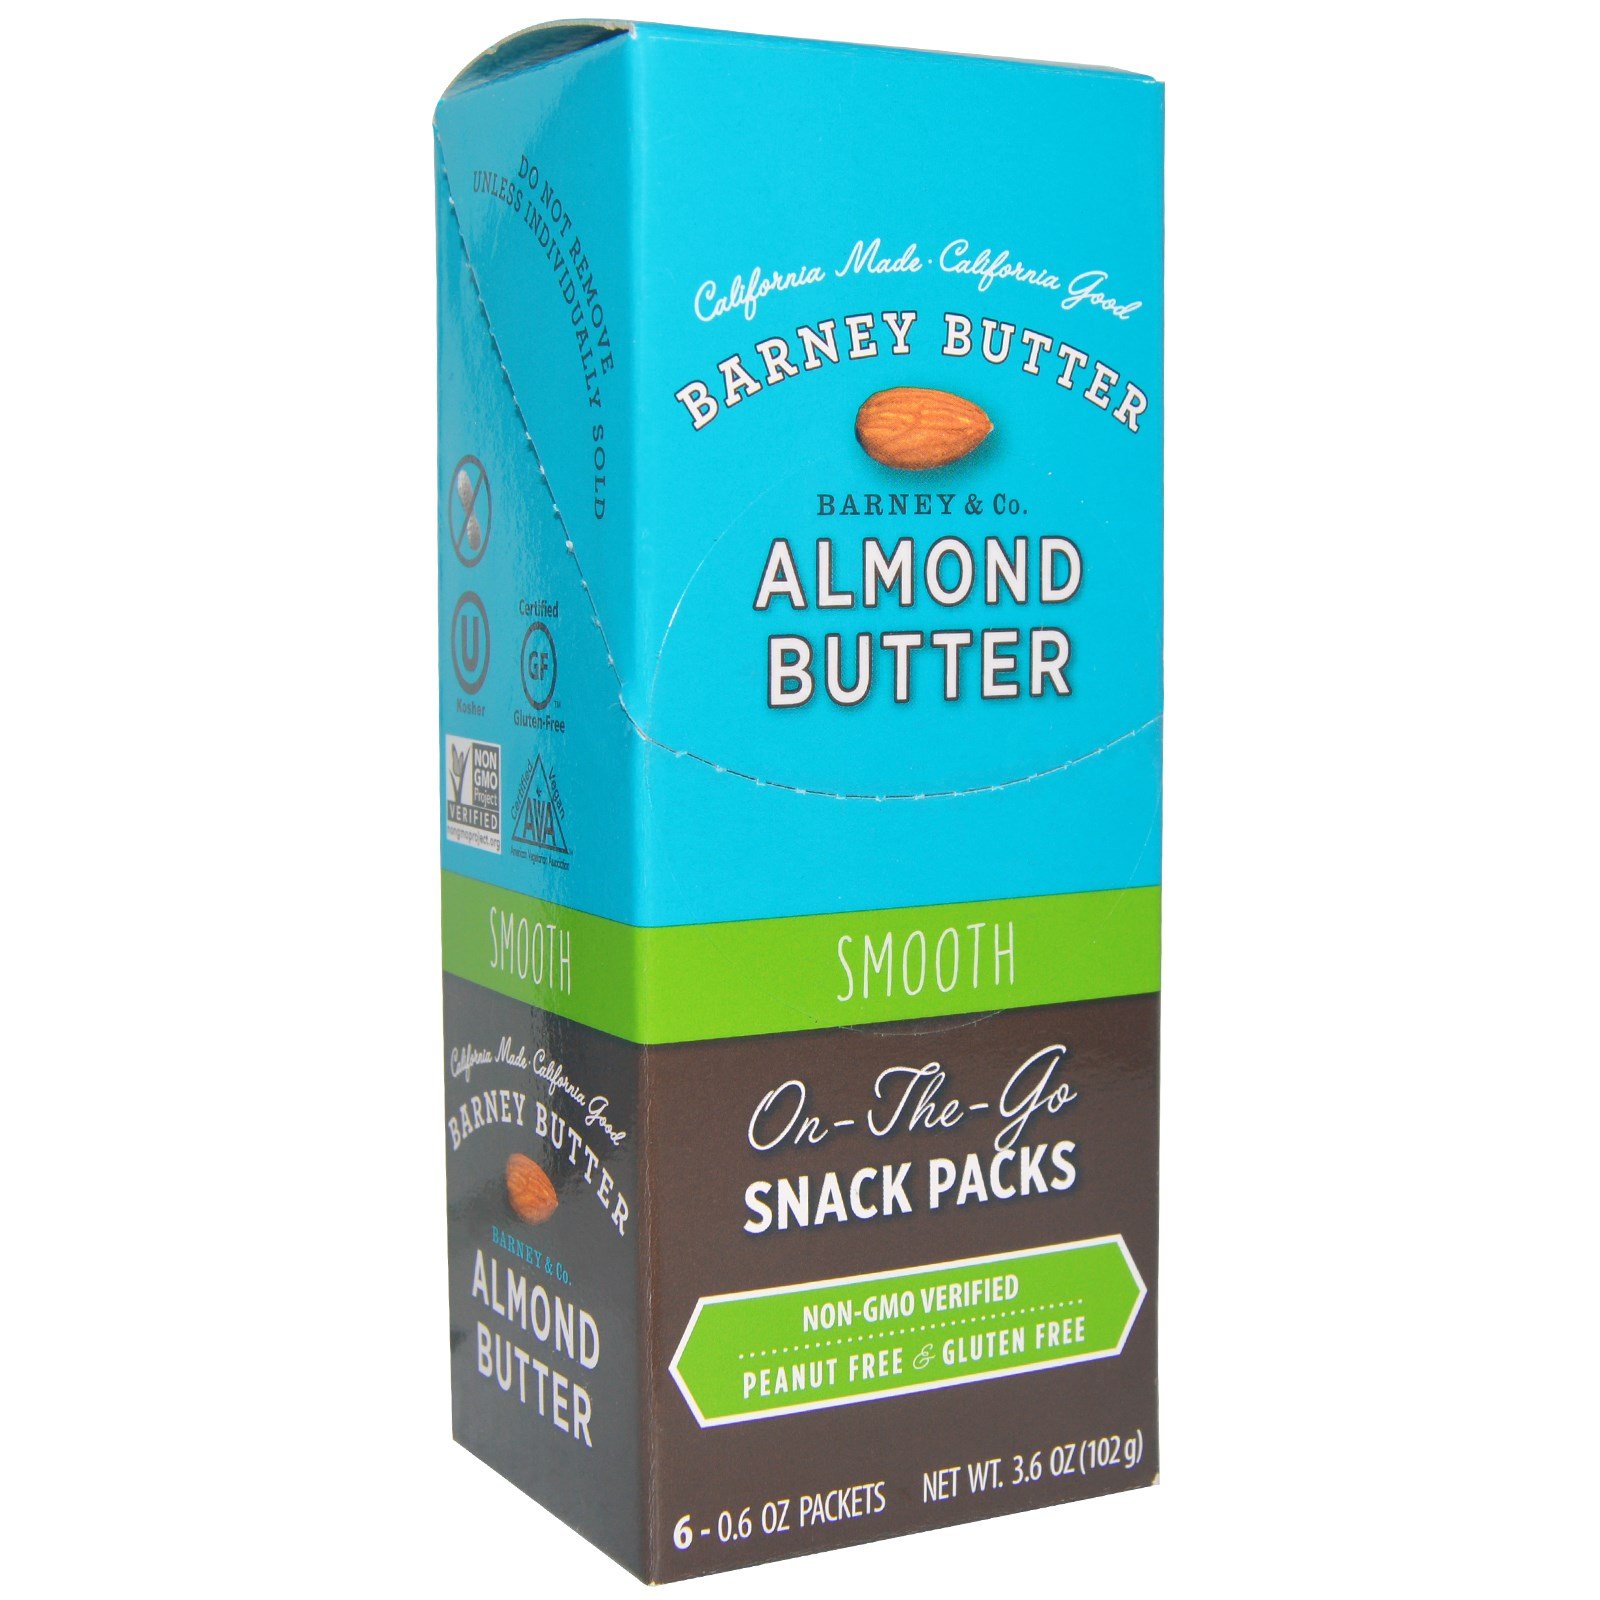 Barney Butter, Almond Butter, On the Go Snack Pack, Smooth, 6 Packets